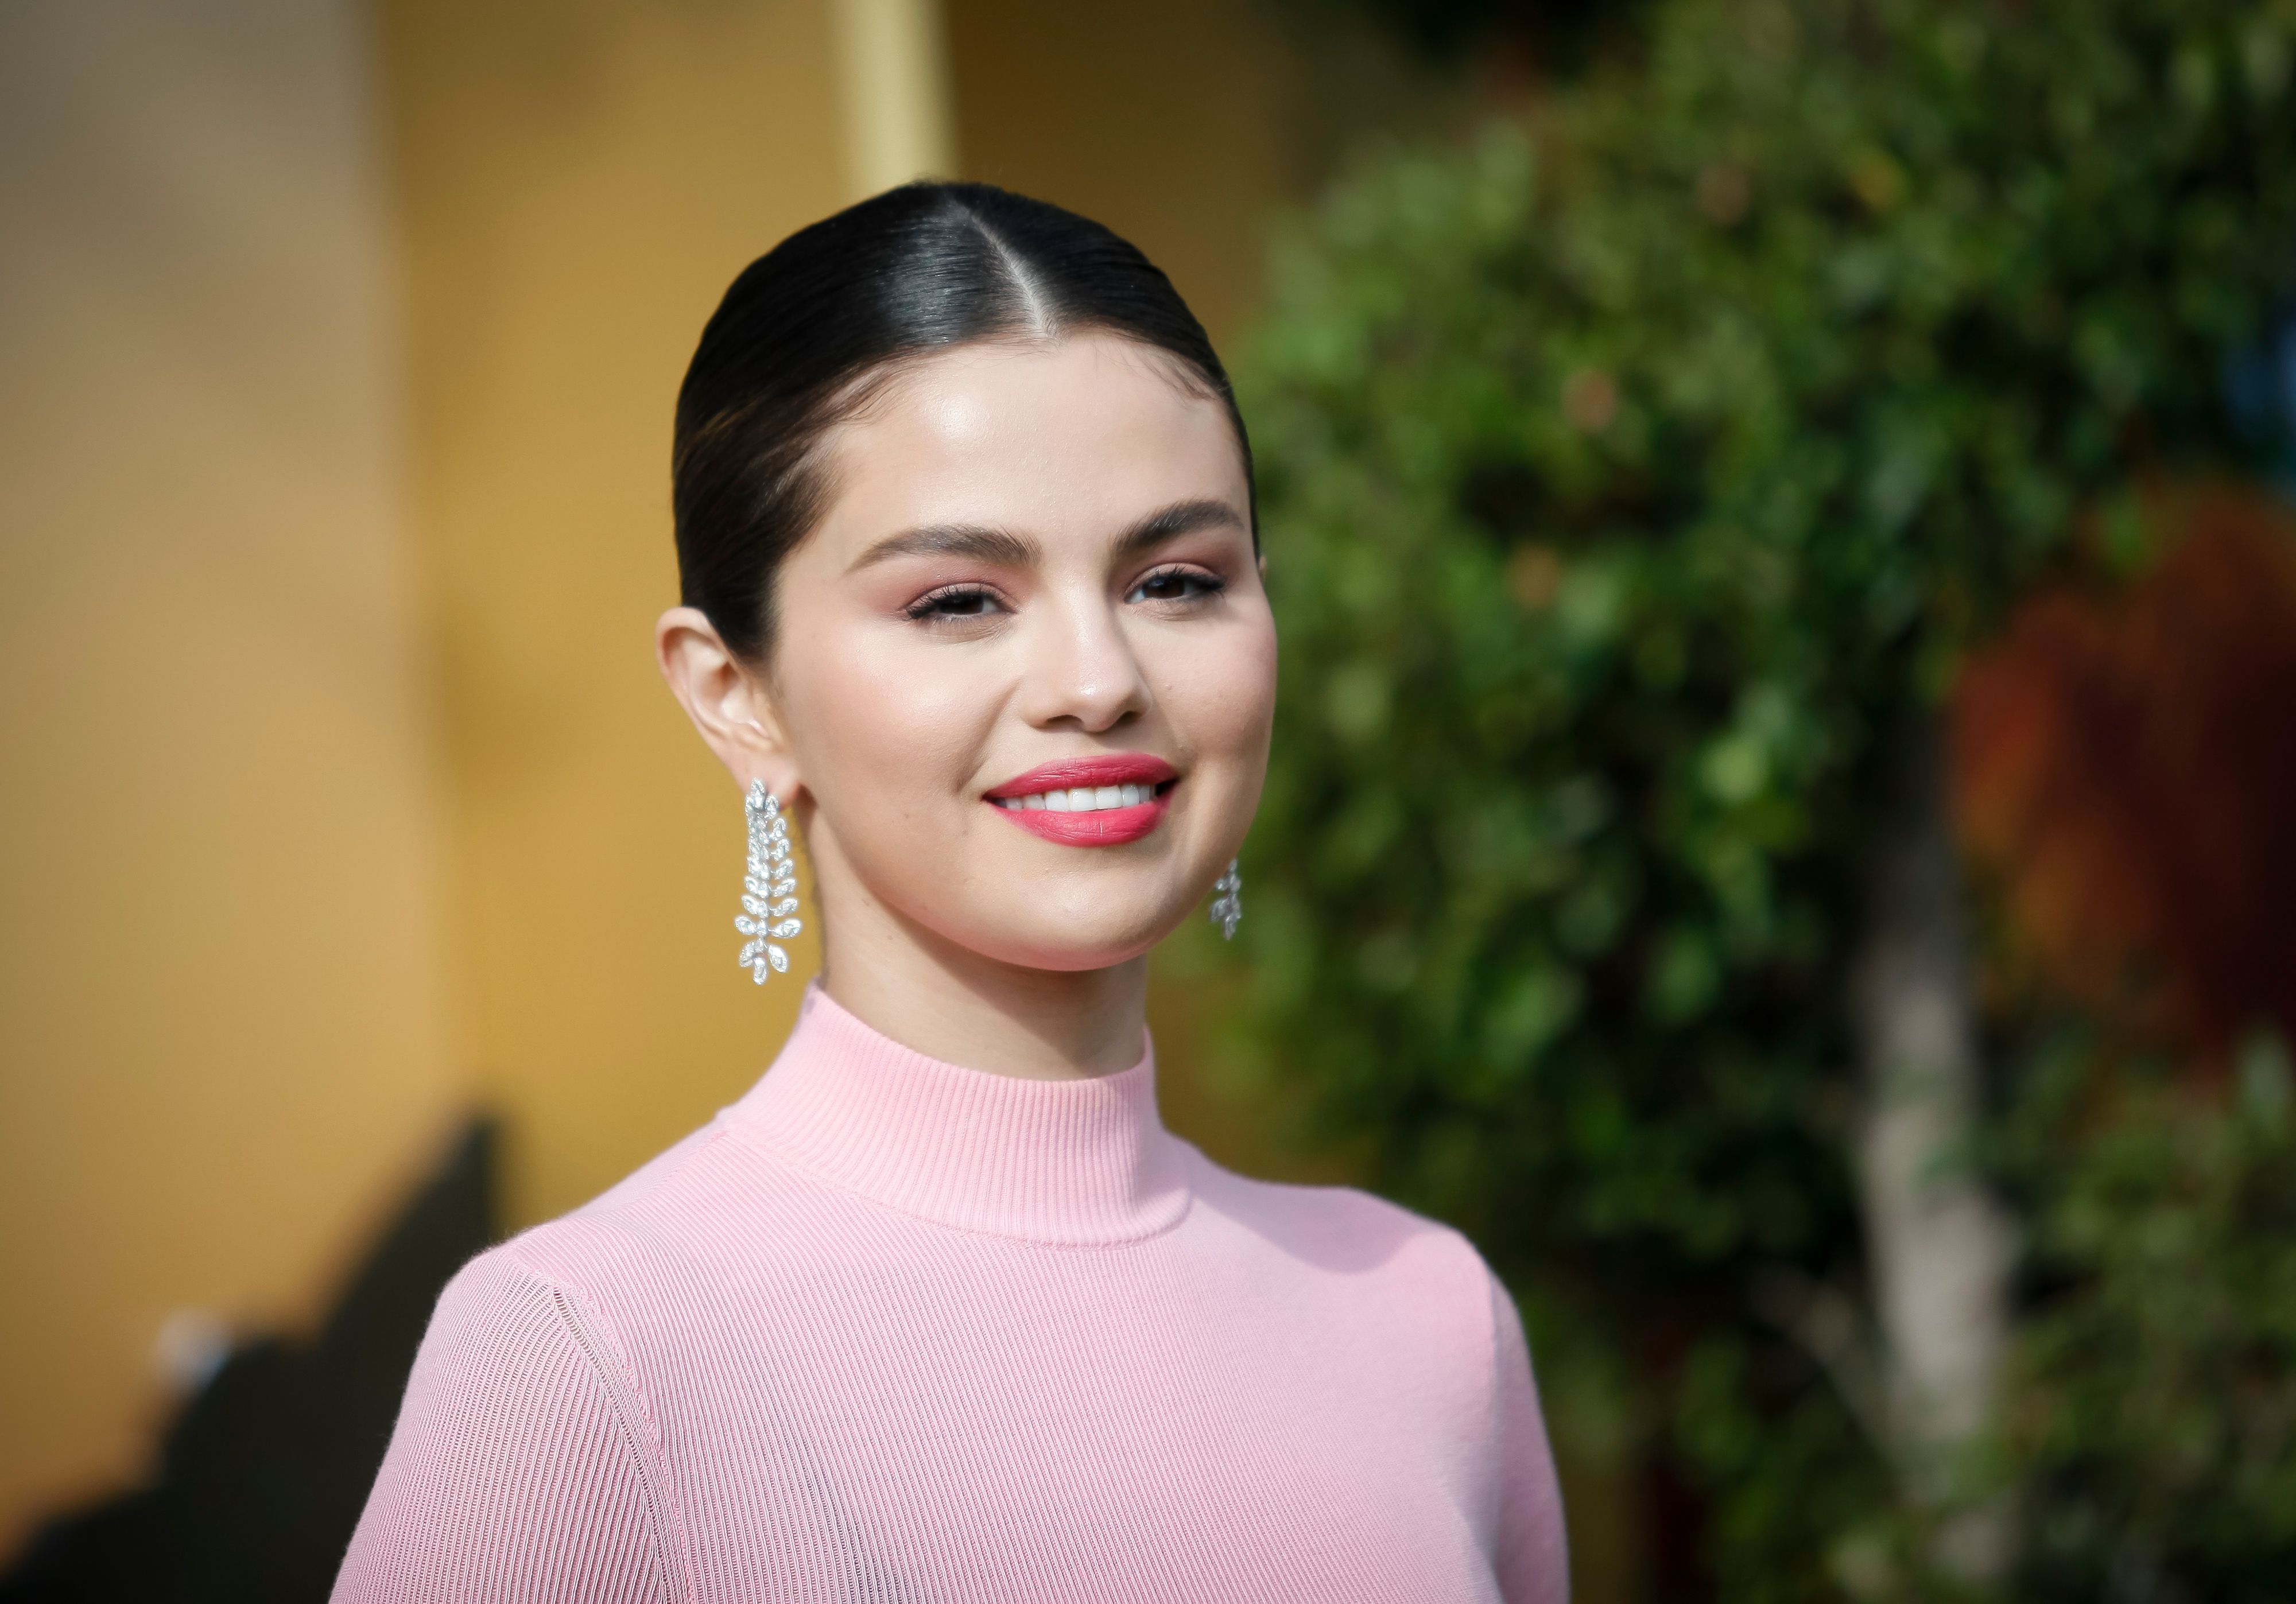 Selena Gomez at the Premiere of Universal Pictures' "Dolittle" at Regency Village Theatre on January 11, 2020 | Photo: Getty Images